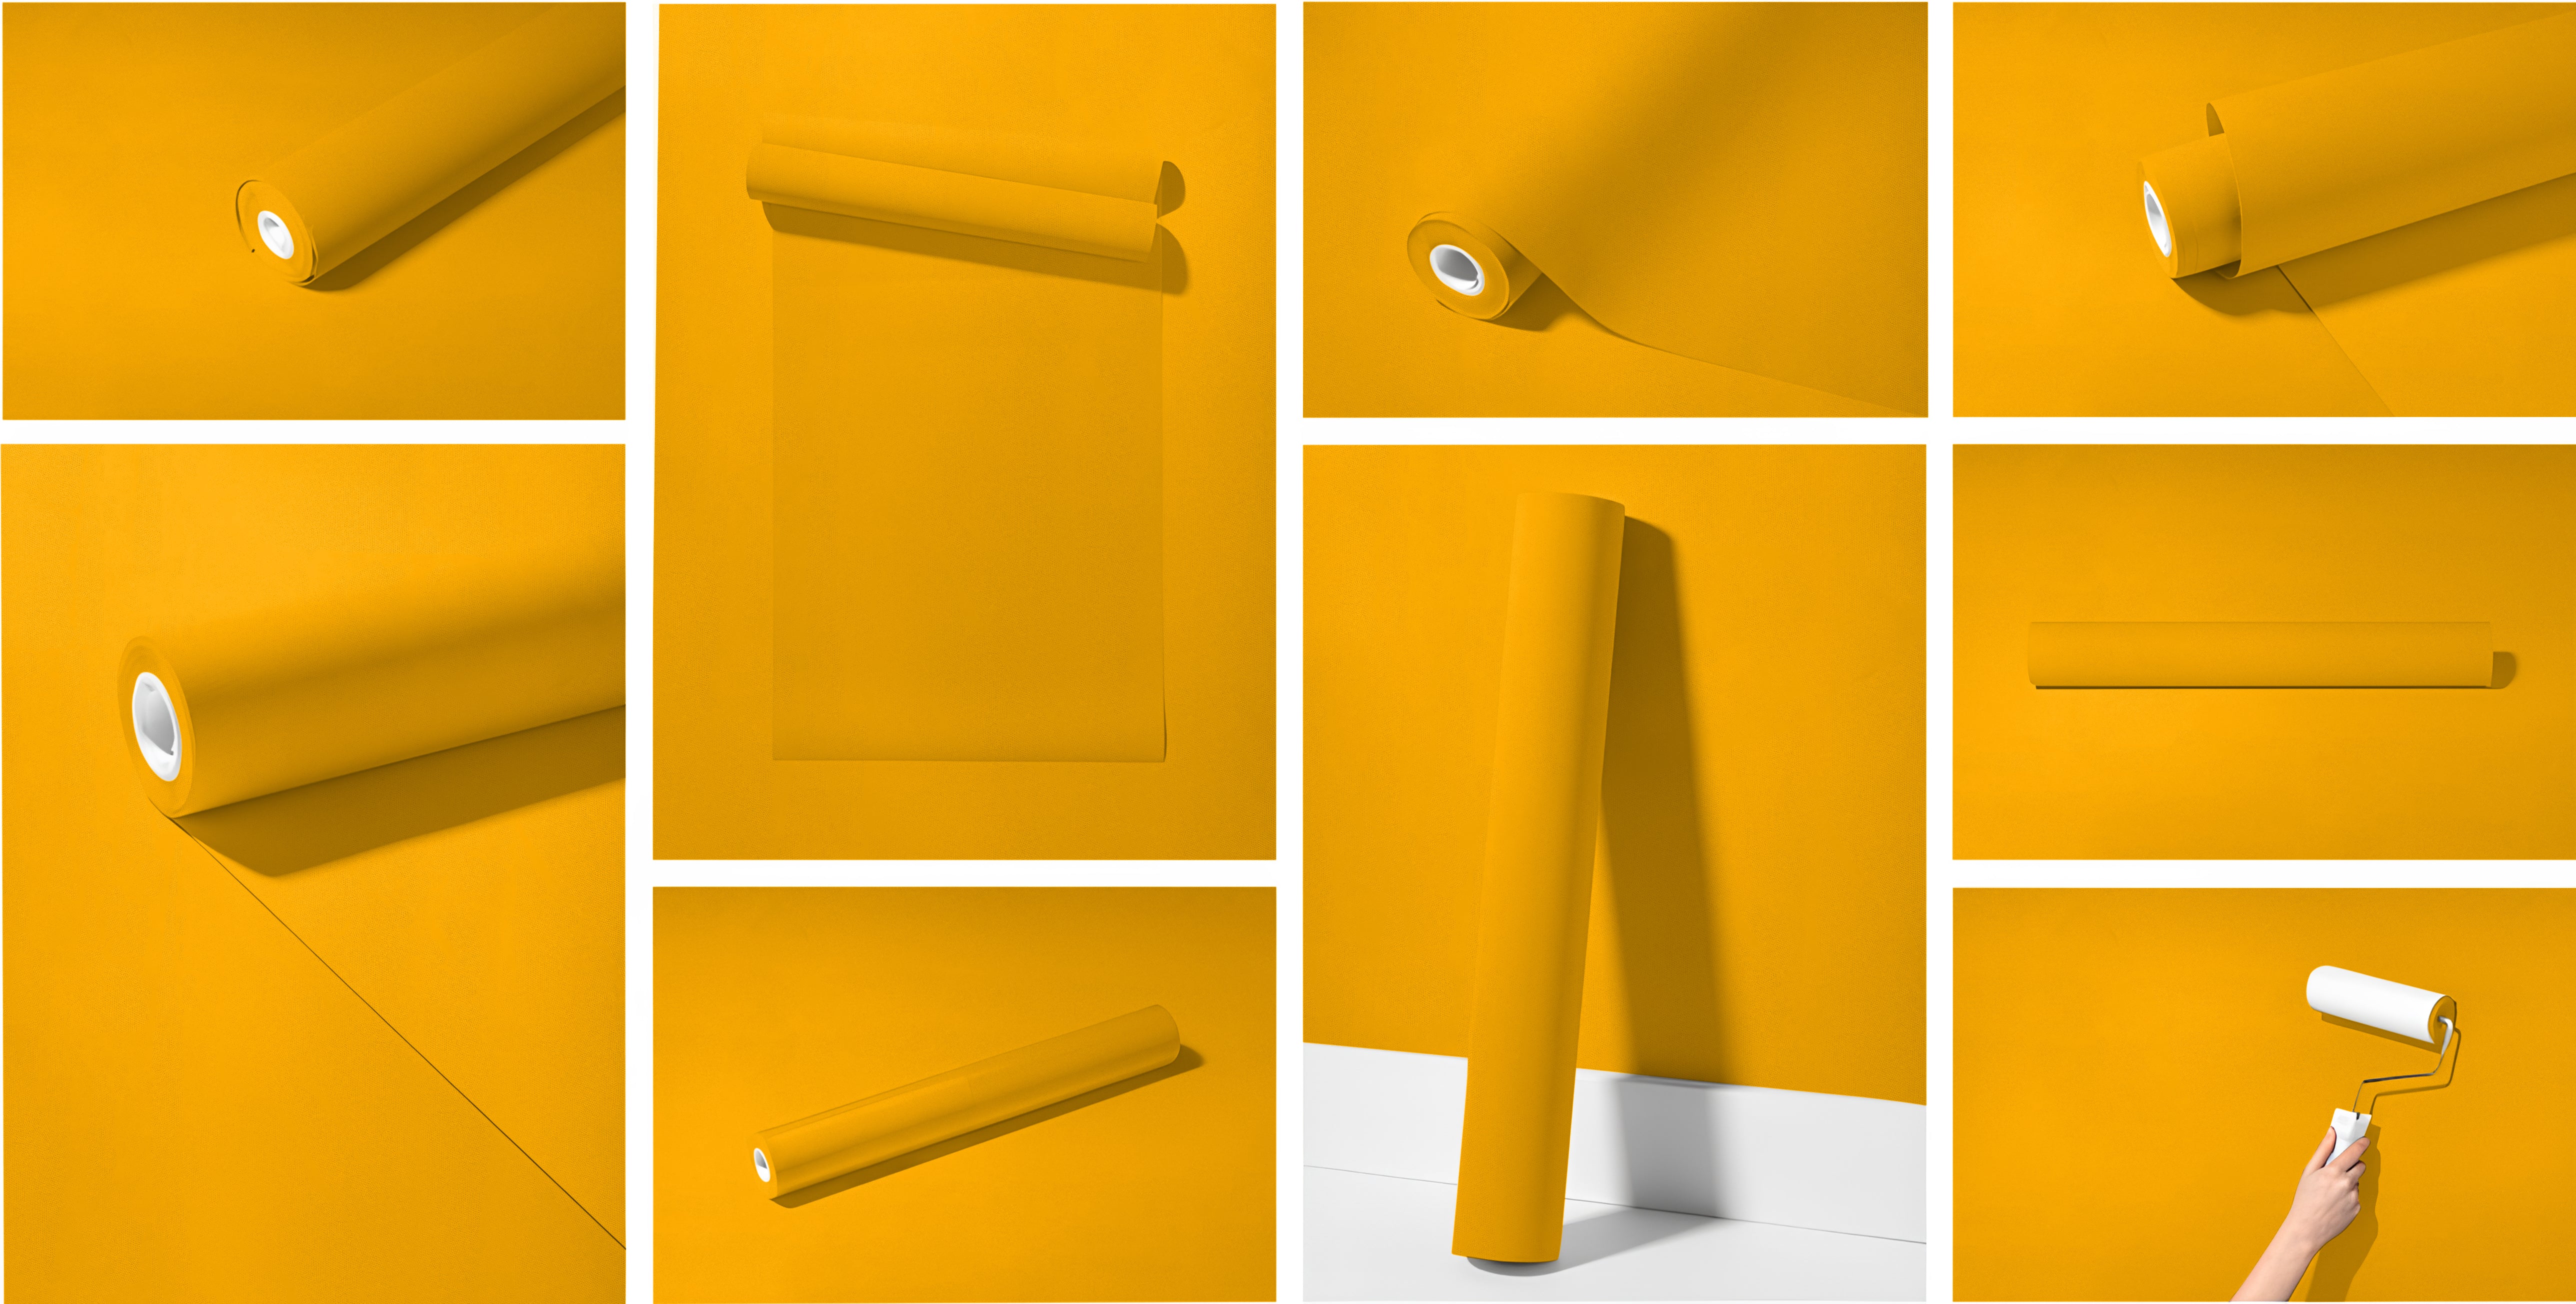 Peel & Stick Removable Re-usable Paint - Color RAL 1003 Signal Yellow - offRAL™ - RALRAW LLC, USA